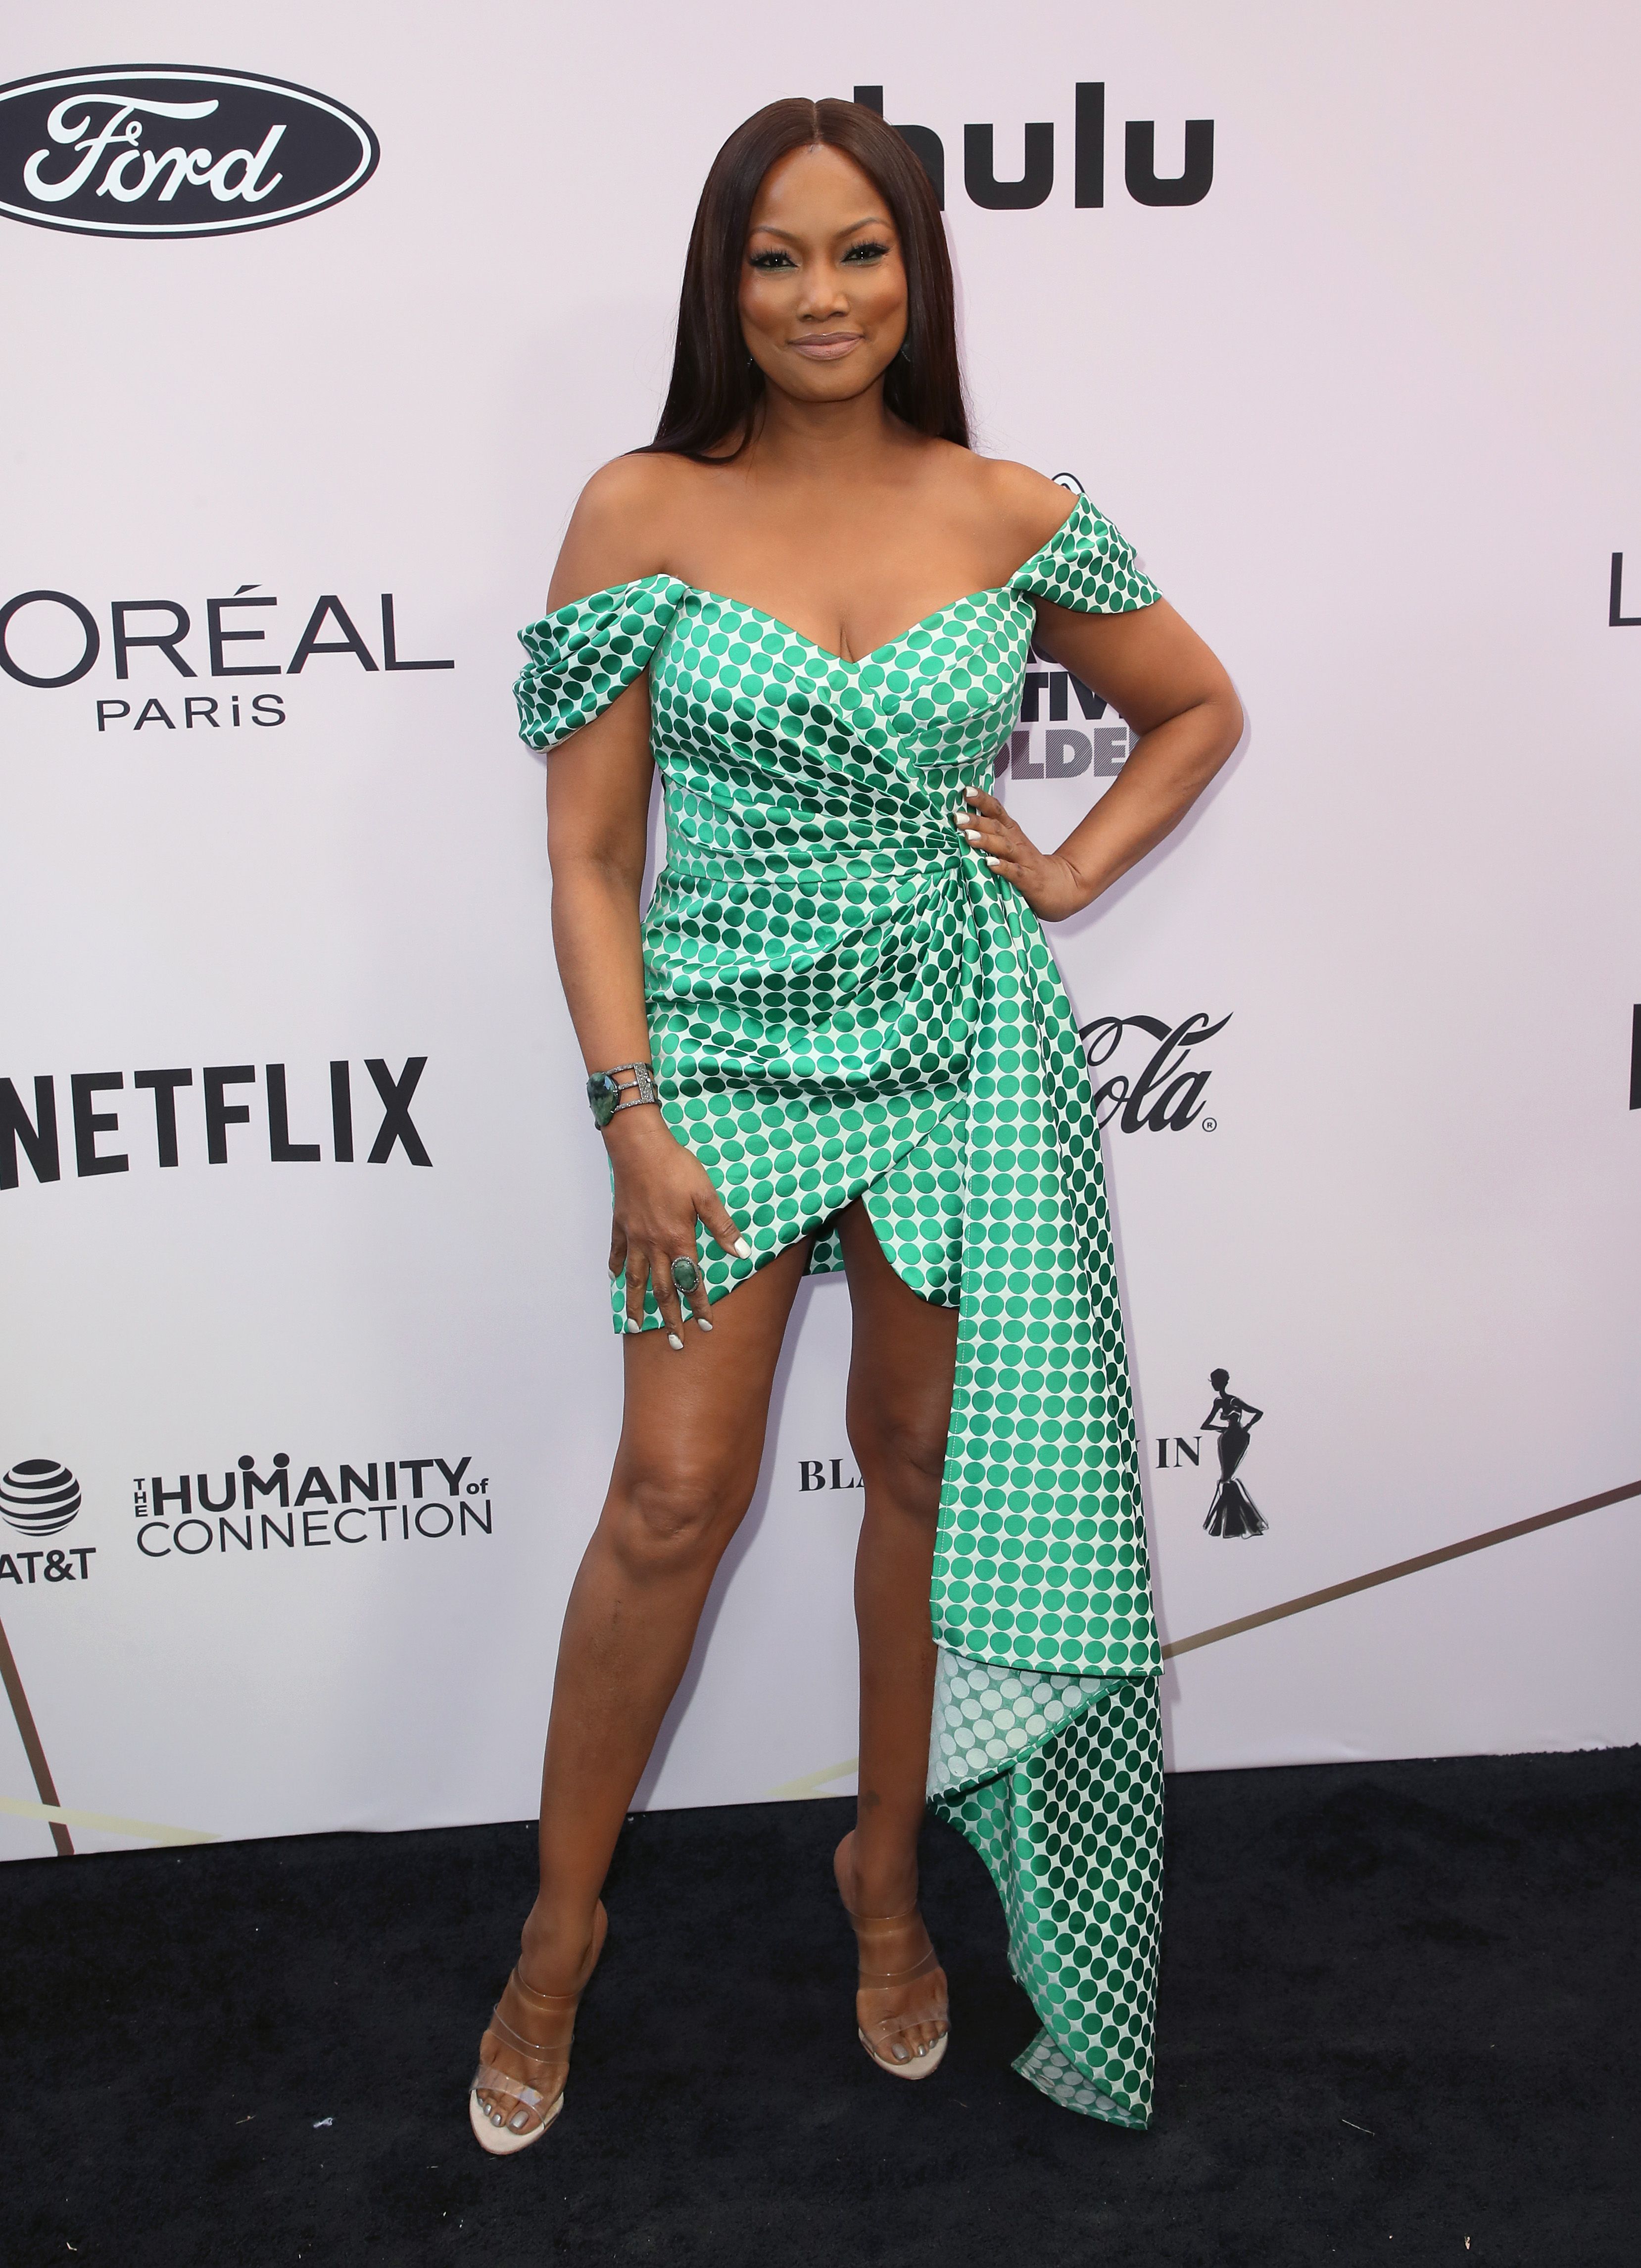 Garcelle Beauvais wears a green and white printed off-the-shoulder gown.